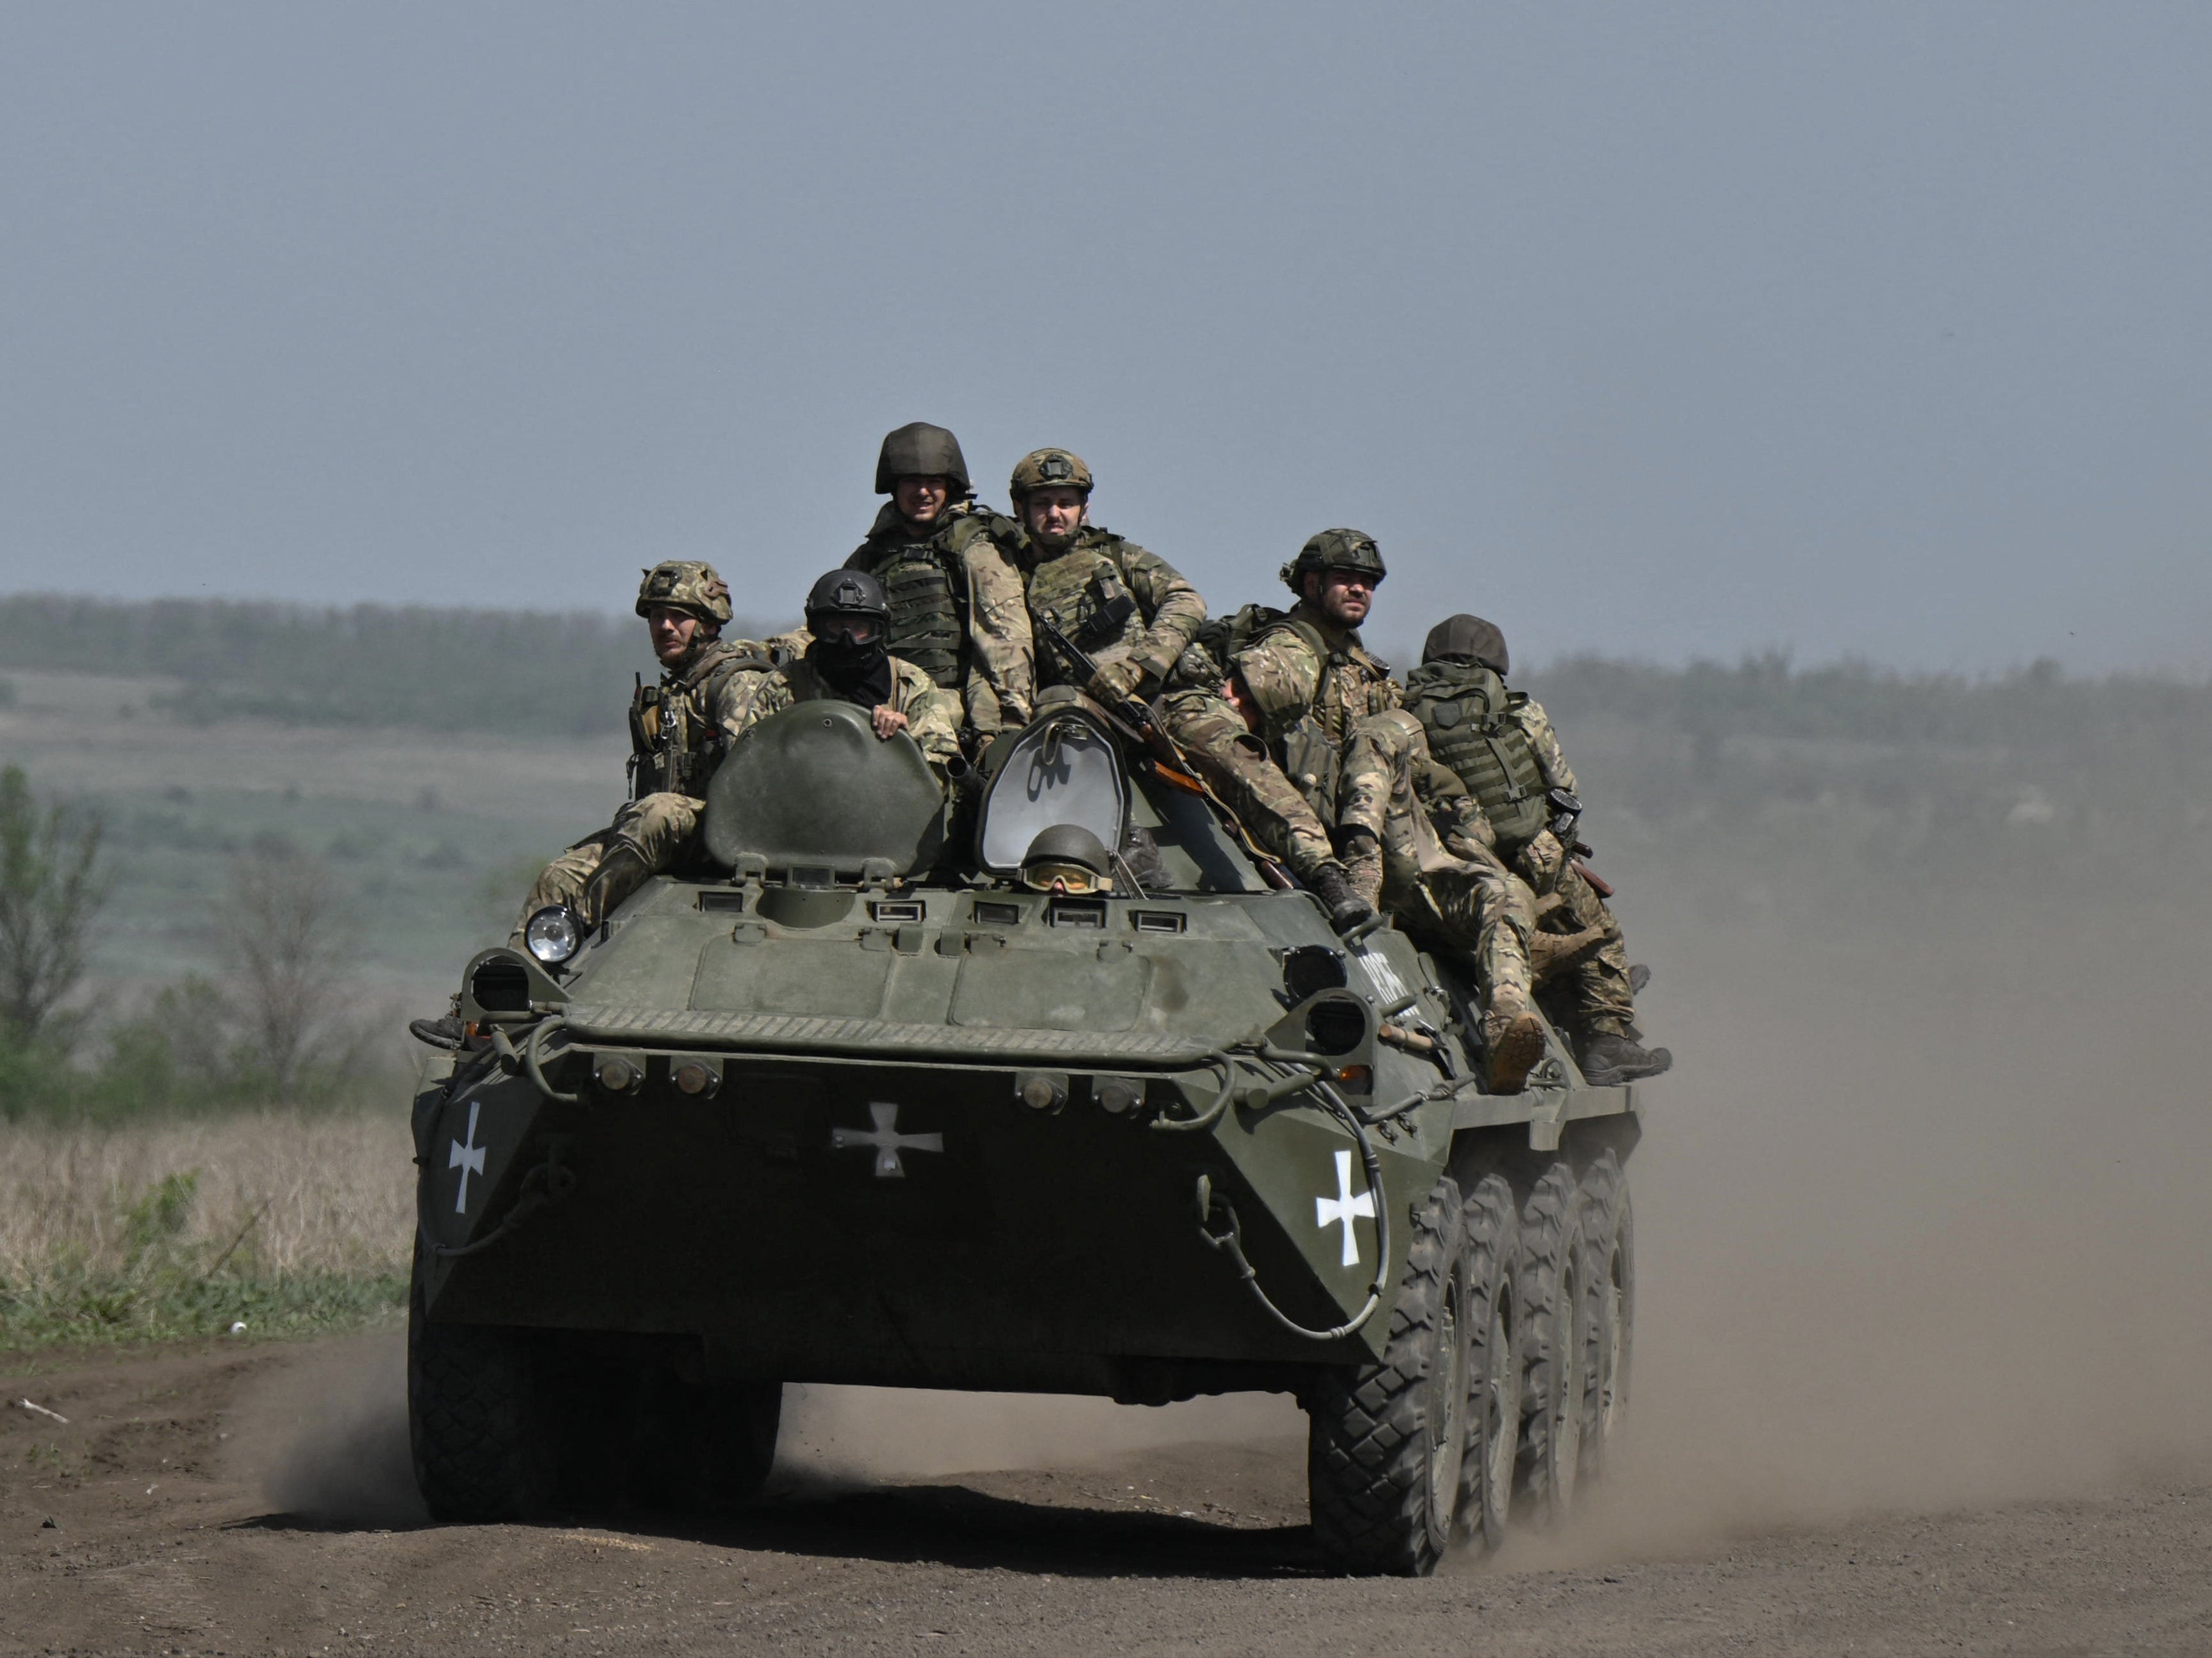 kyiv’s forces facing big russian push on eastern frontline, military says